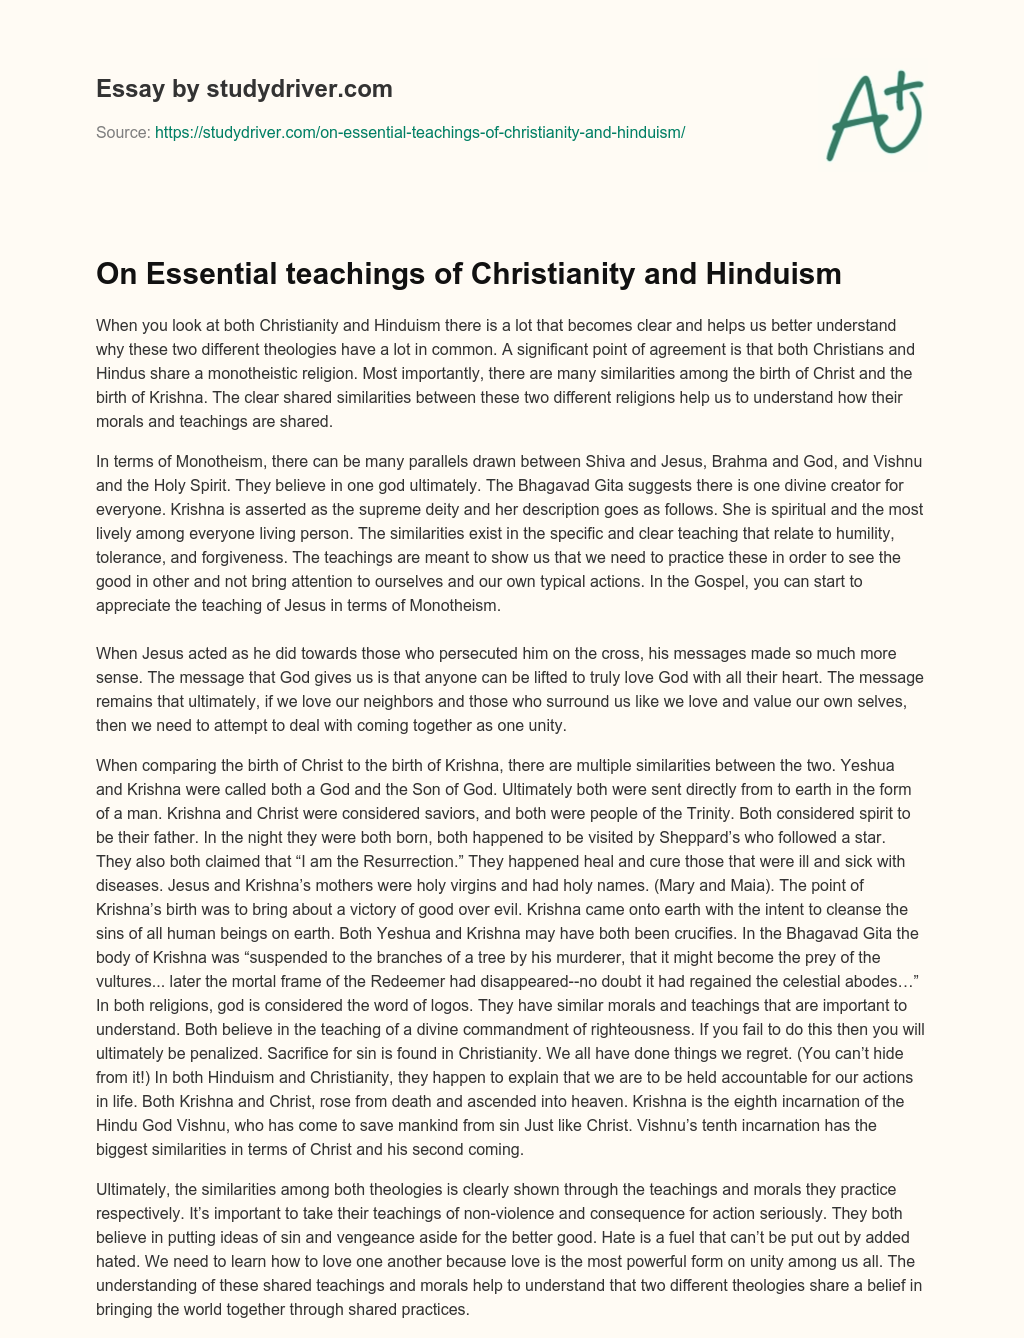 On Essential Teachings of Christianity and Hinduism essay